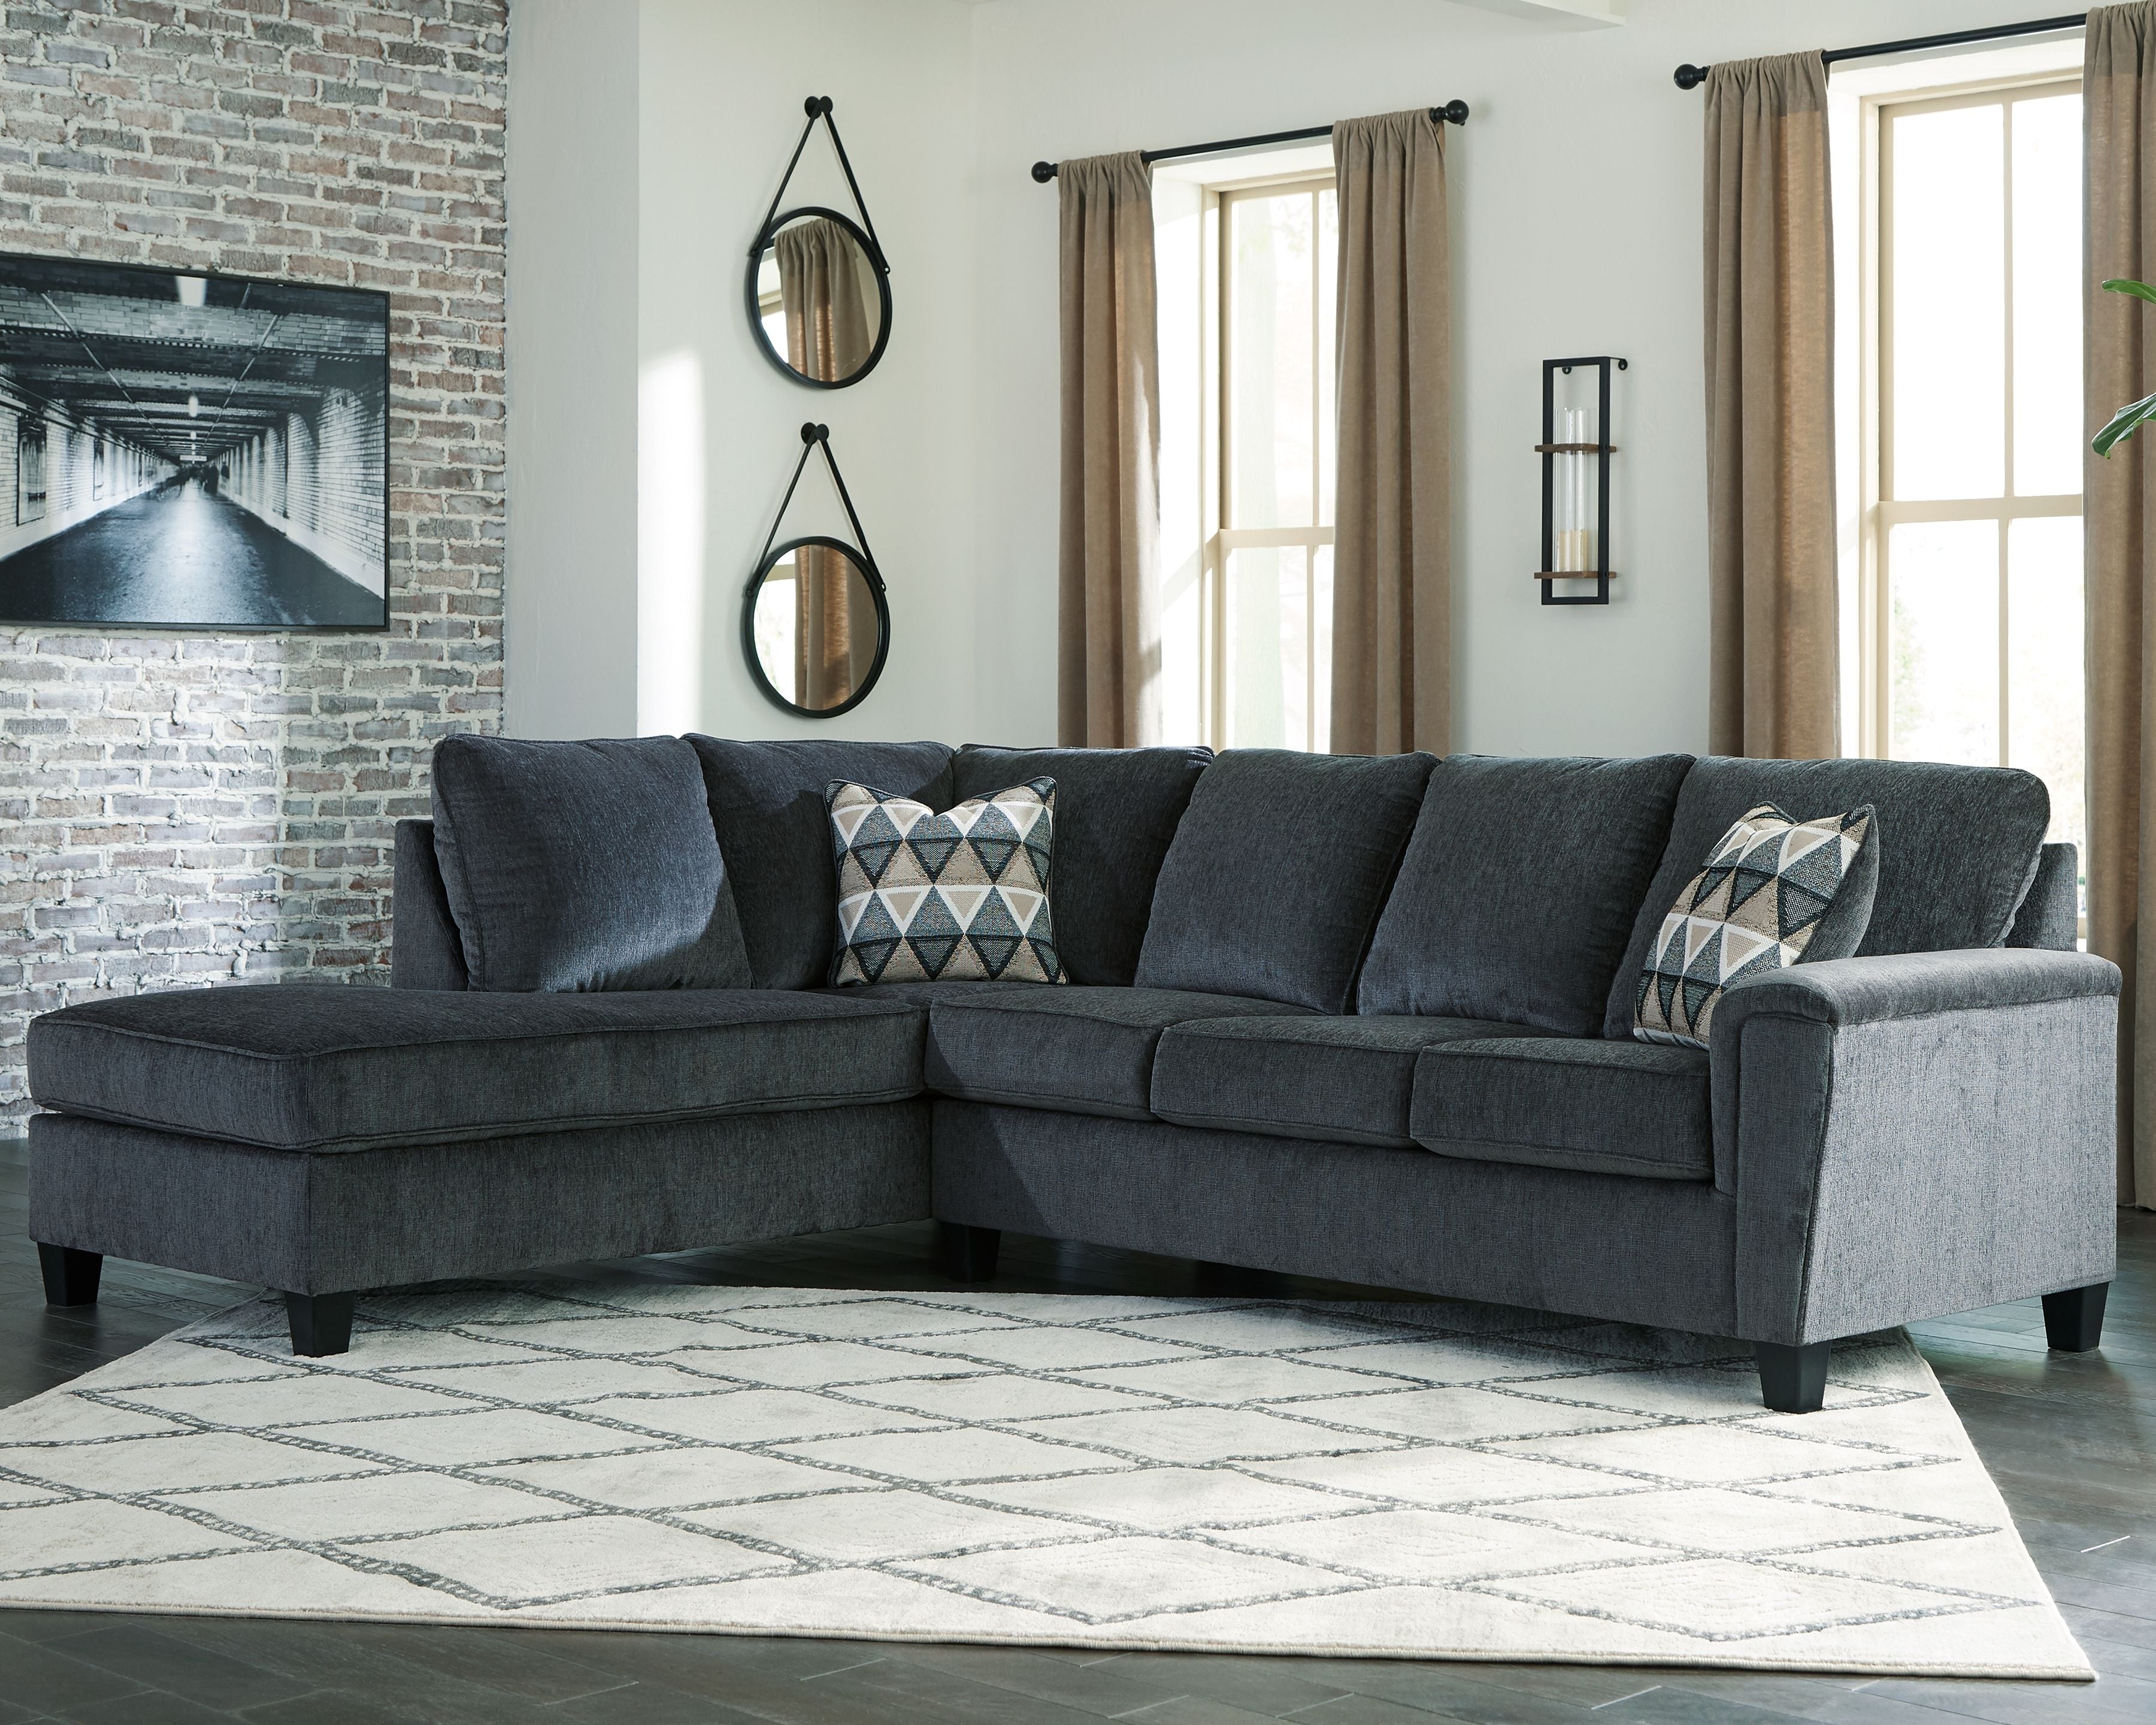 Abinger Sleeper Sectional w/ Chaise-Sleeper Sectionals-American Furniture Outlet